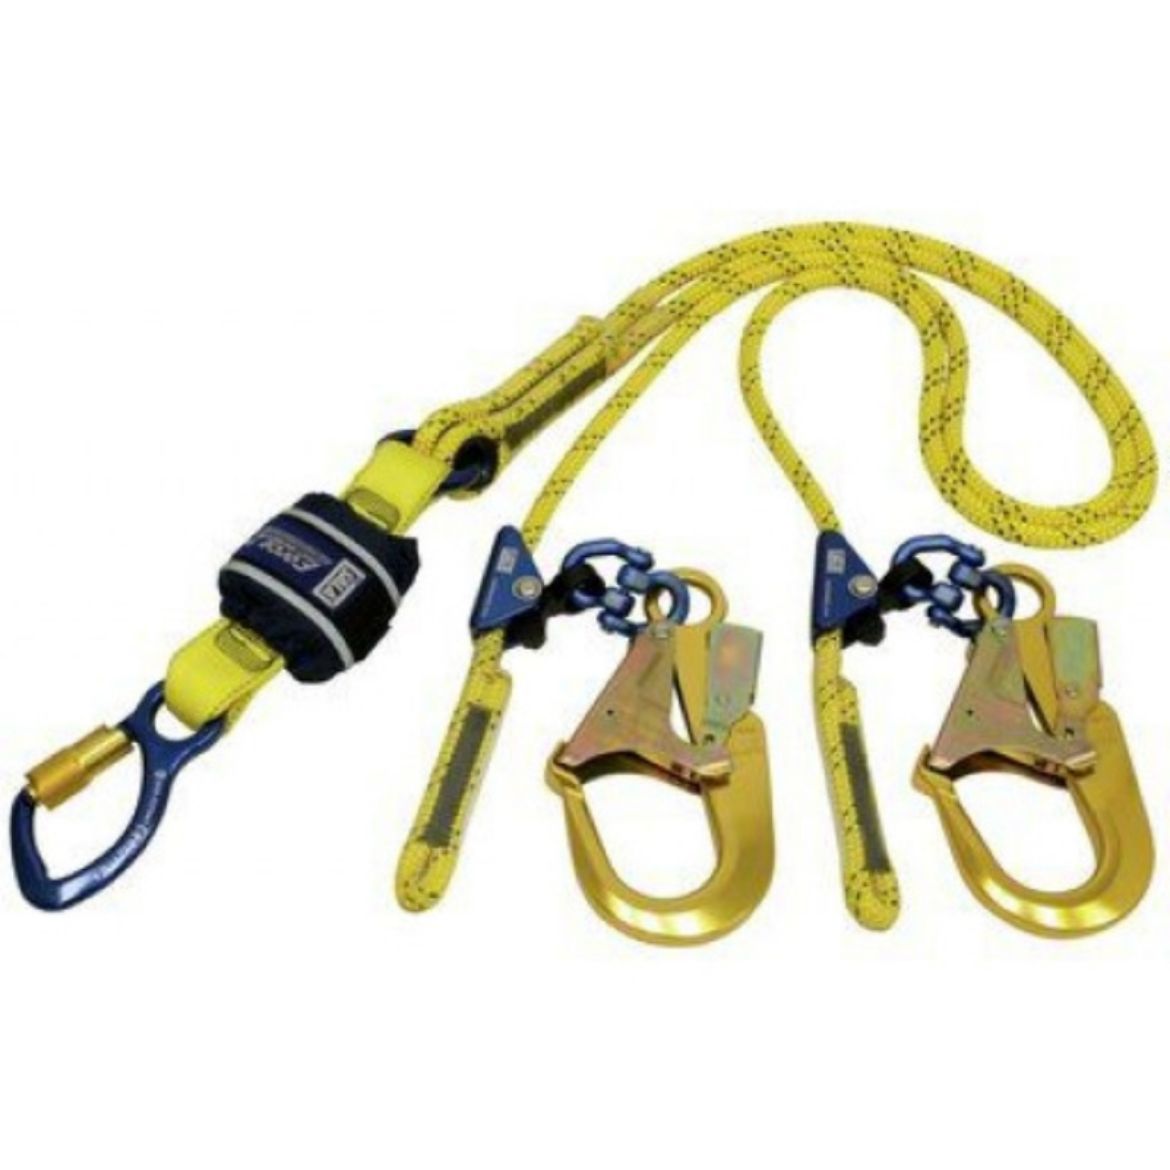 Picture of Z13206119R FORCE2™ SHOCK ABSORBING LANYARDS - KERNMANTLE ROPE - DOUBLE TAIL ADJUSTABLE, 2.0M WITH ALUMINIUM TRIPLE ACTION KARABINER AND SCAFFOLD HOOKS